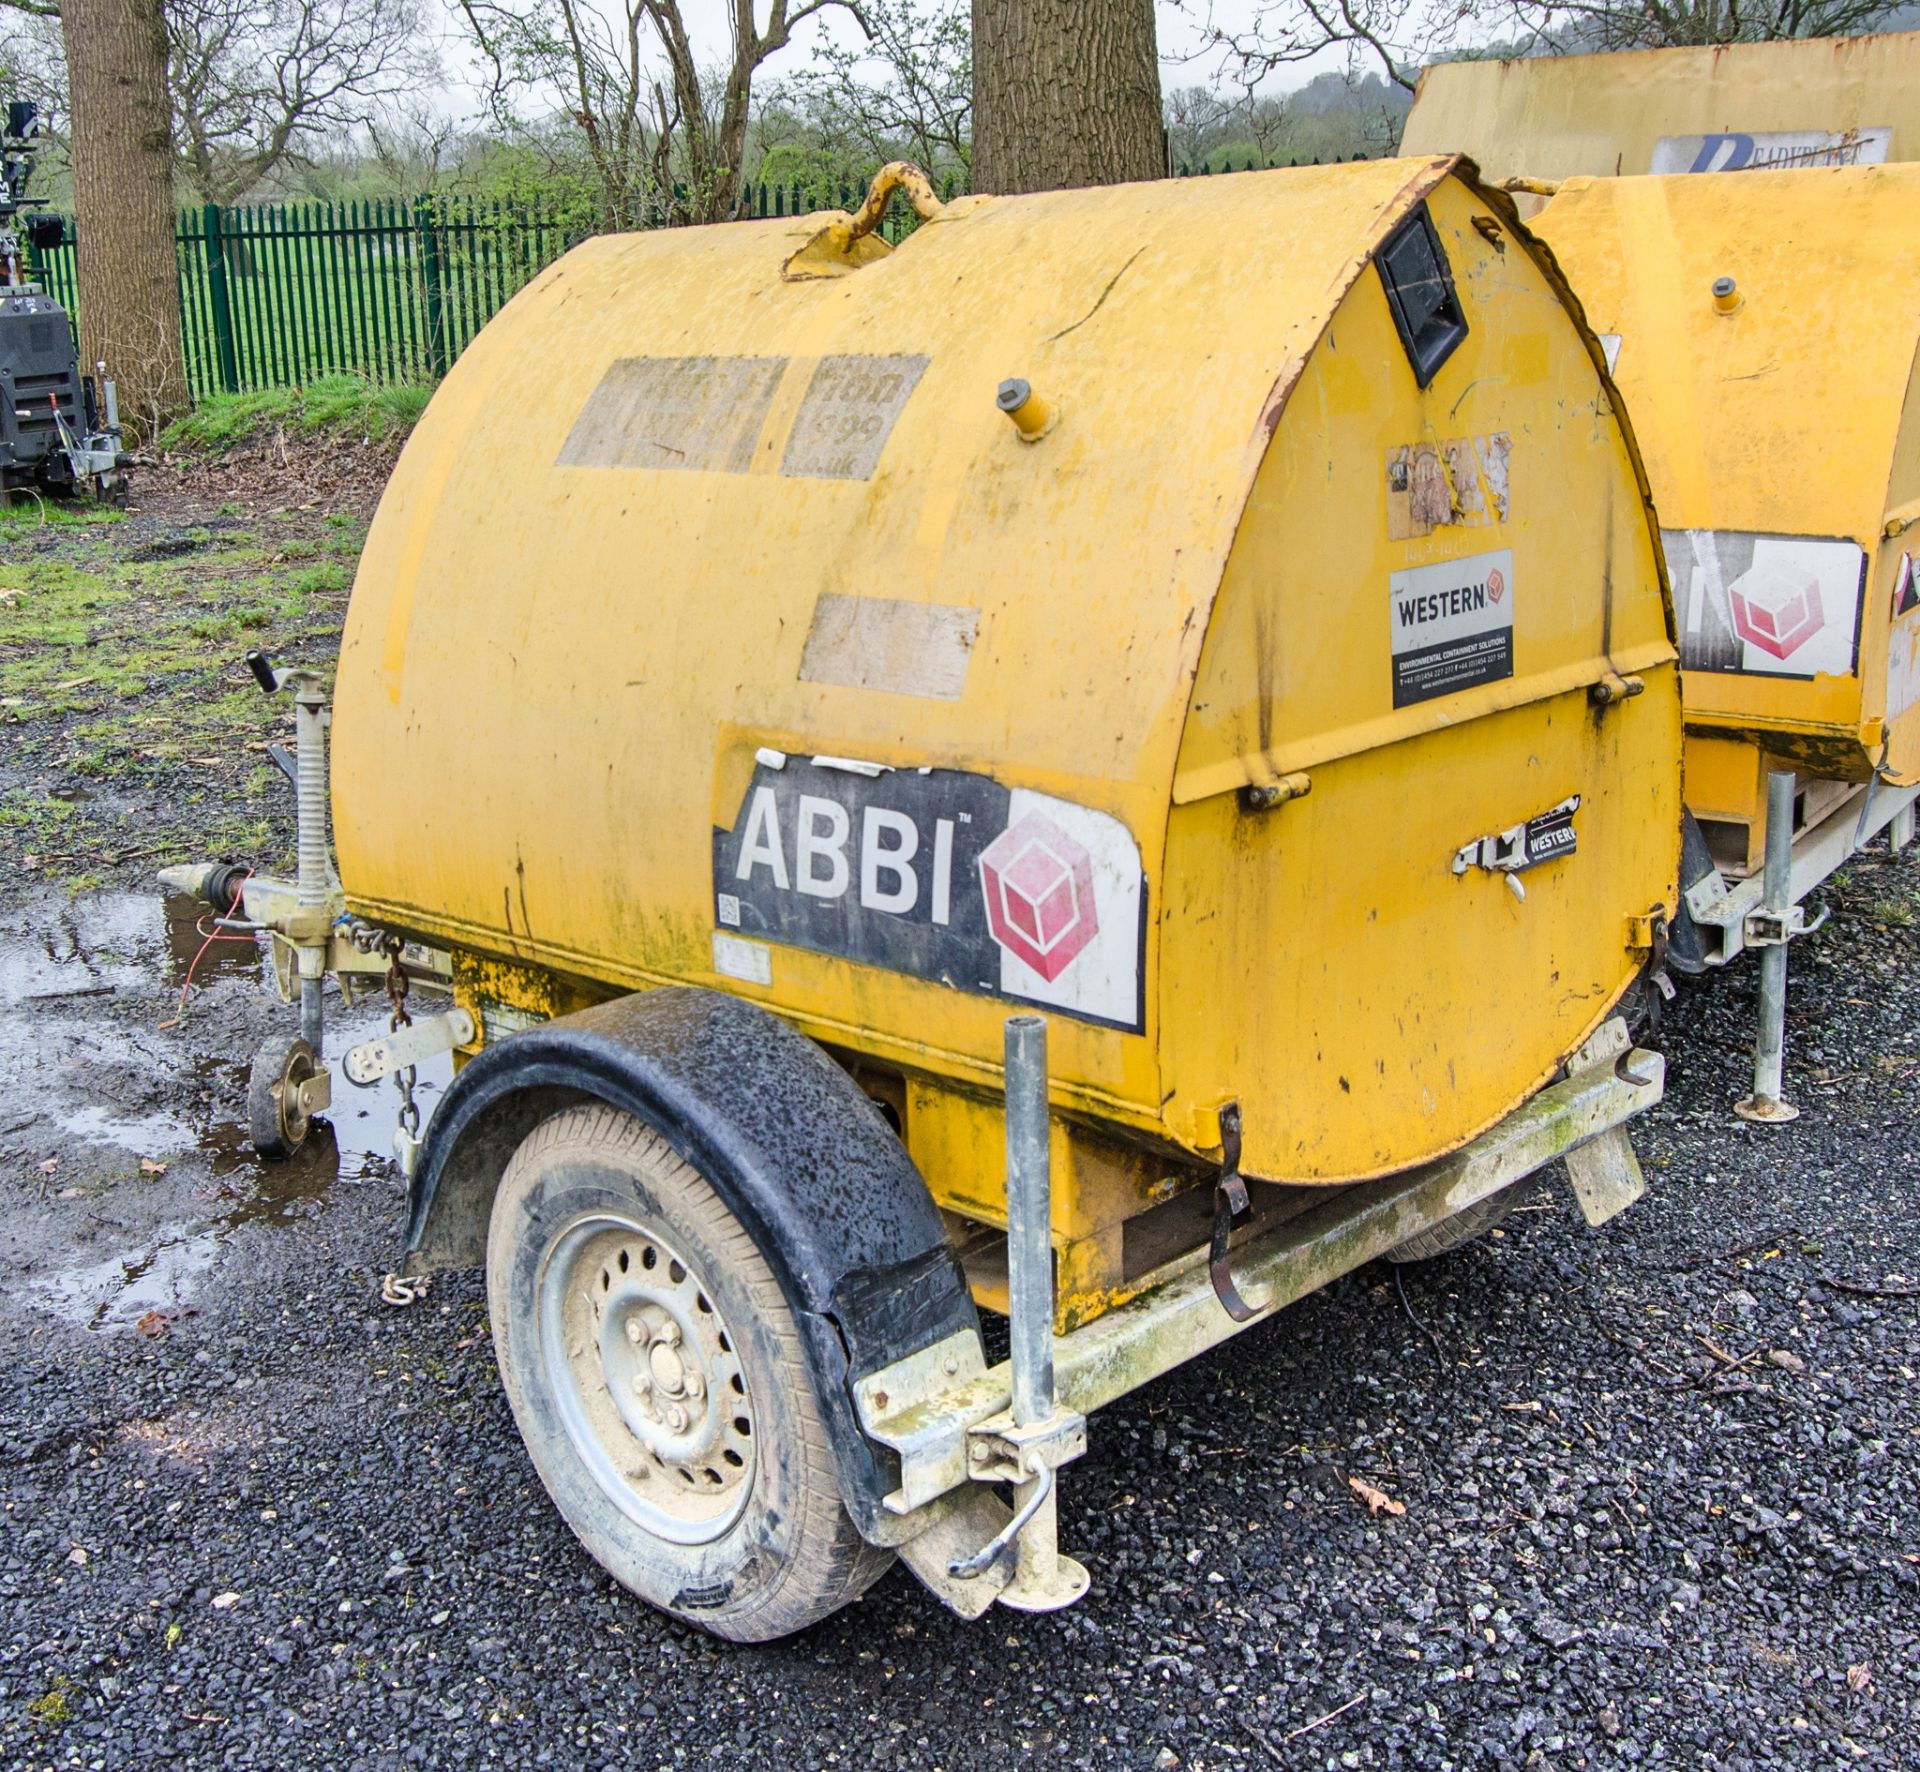 Western Abbi 950 litre fast tow bunded fuel bowser c/w manual pump, delivery hose & nozzle 14031402 - Image 4 of 7